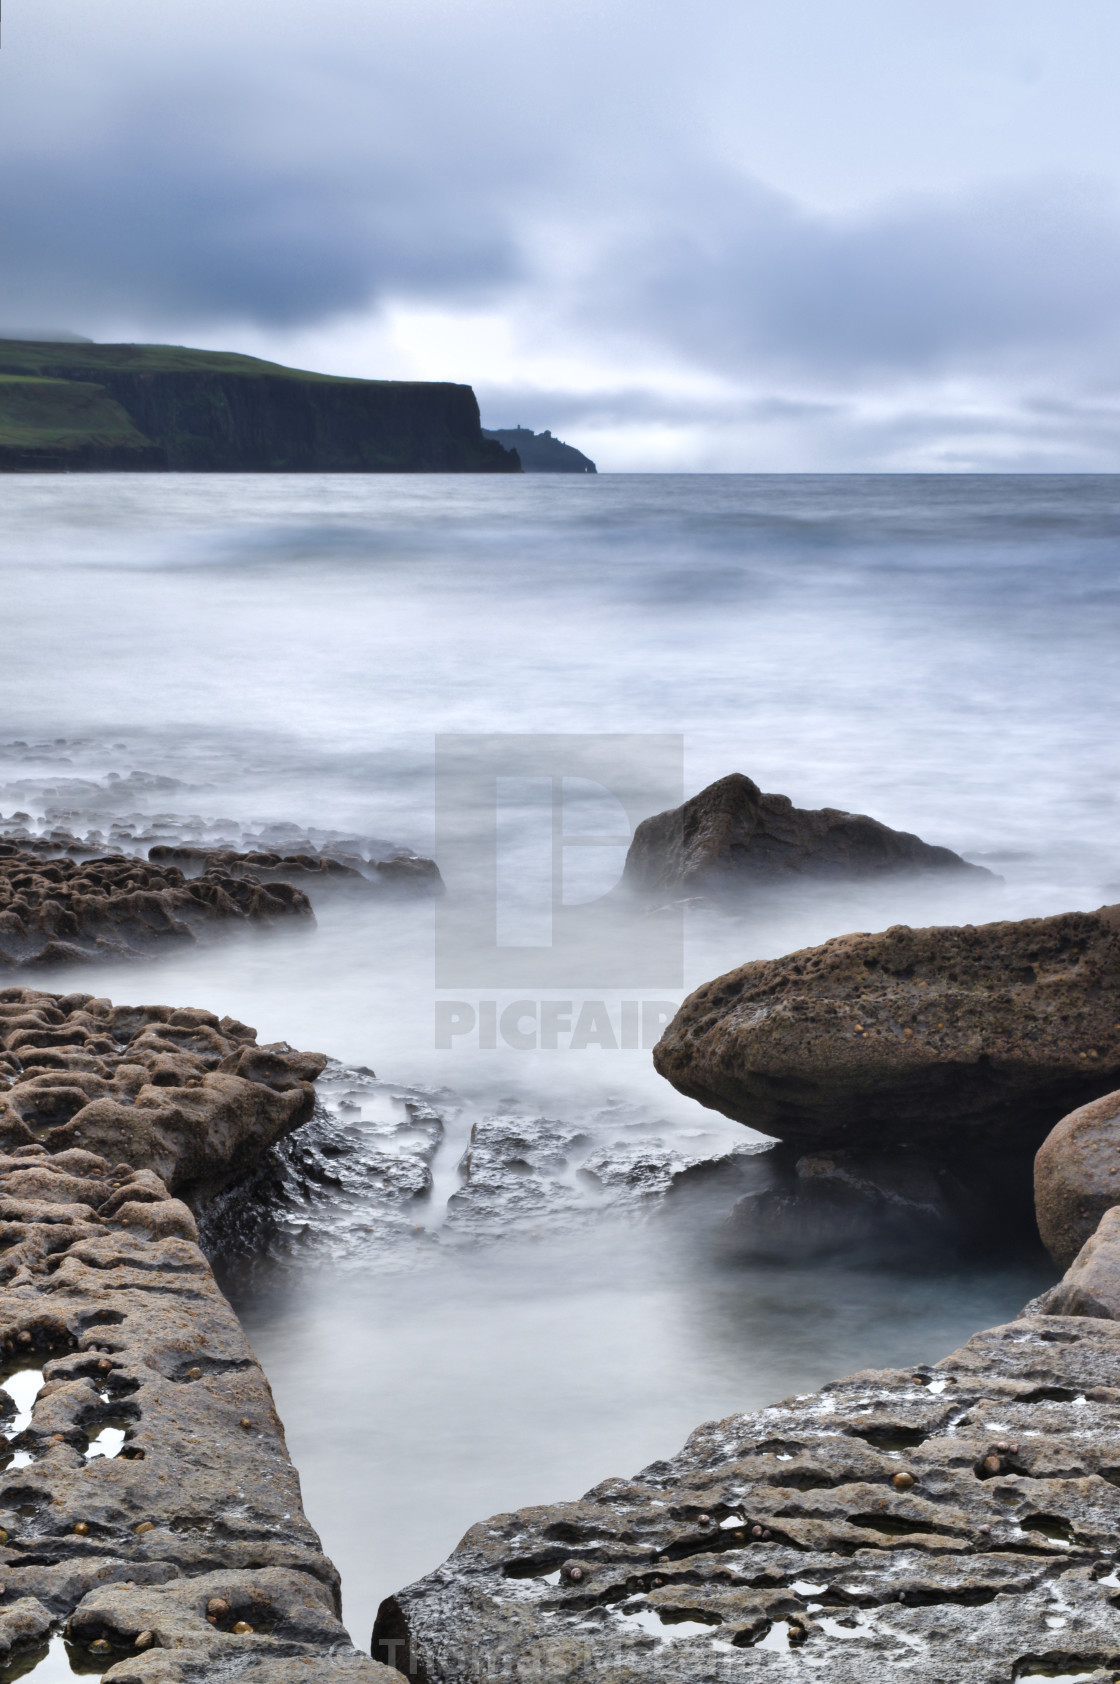 "The Cliffs of Moher as seen from Doolin Pier" stock image